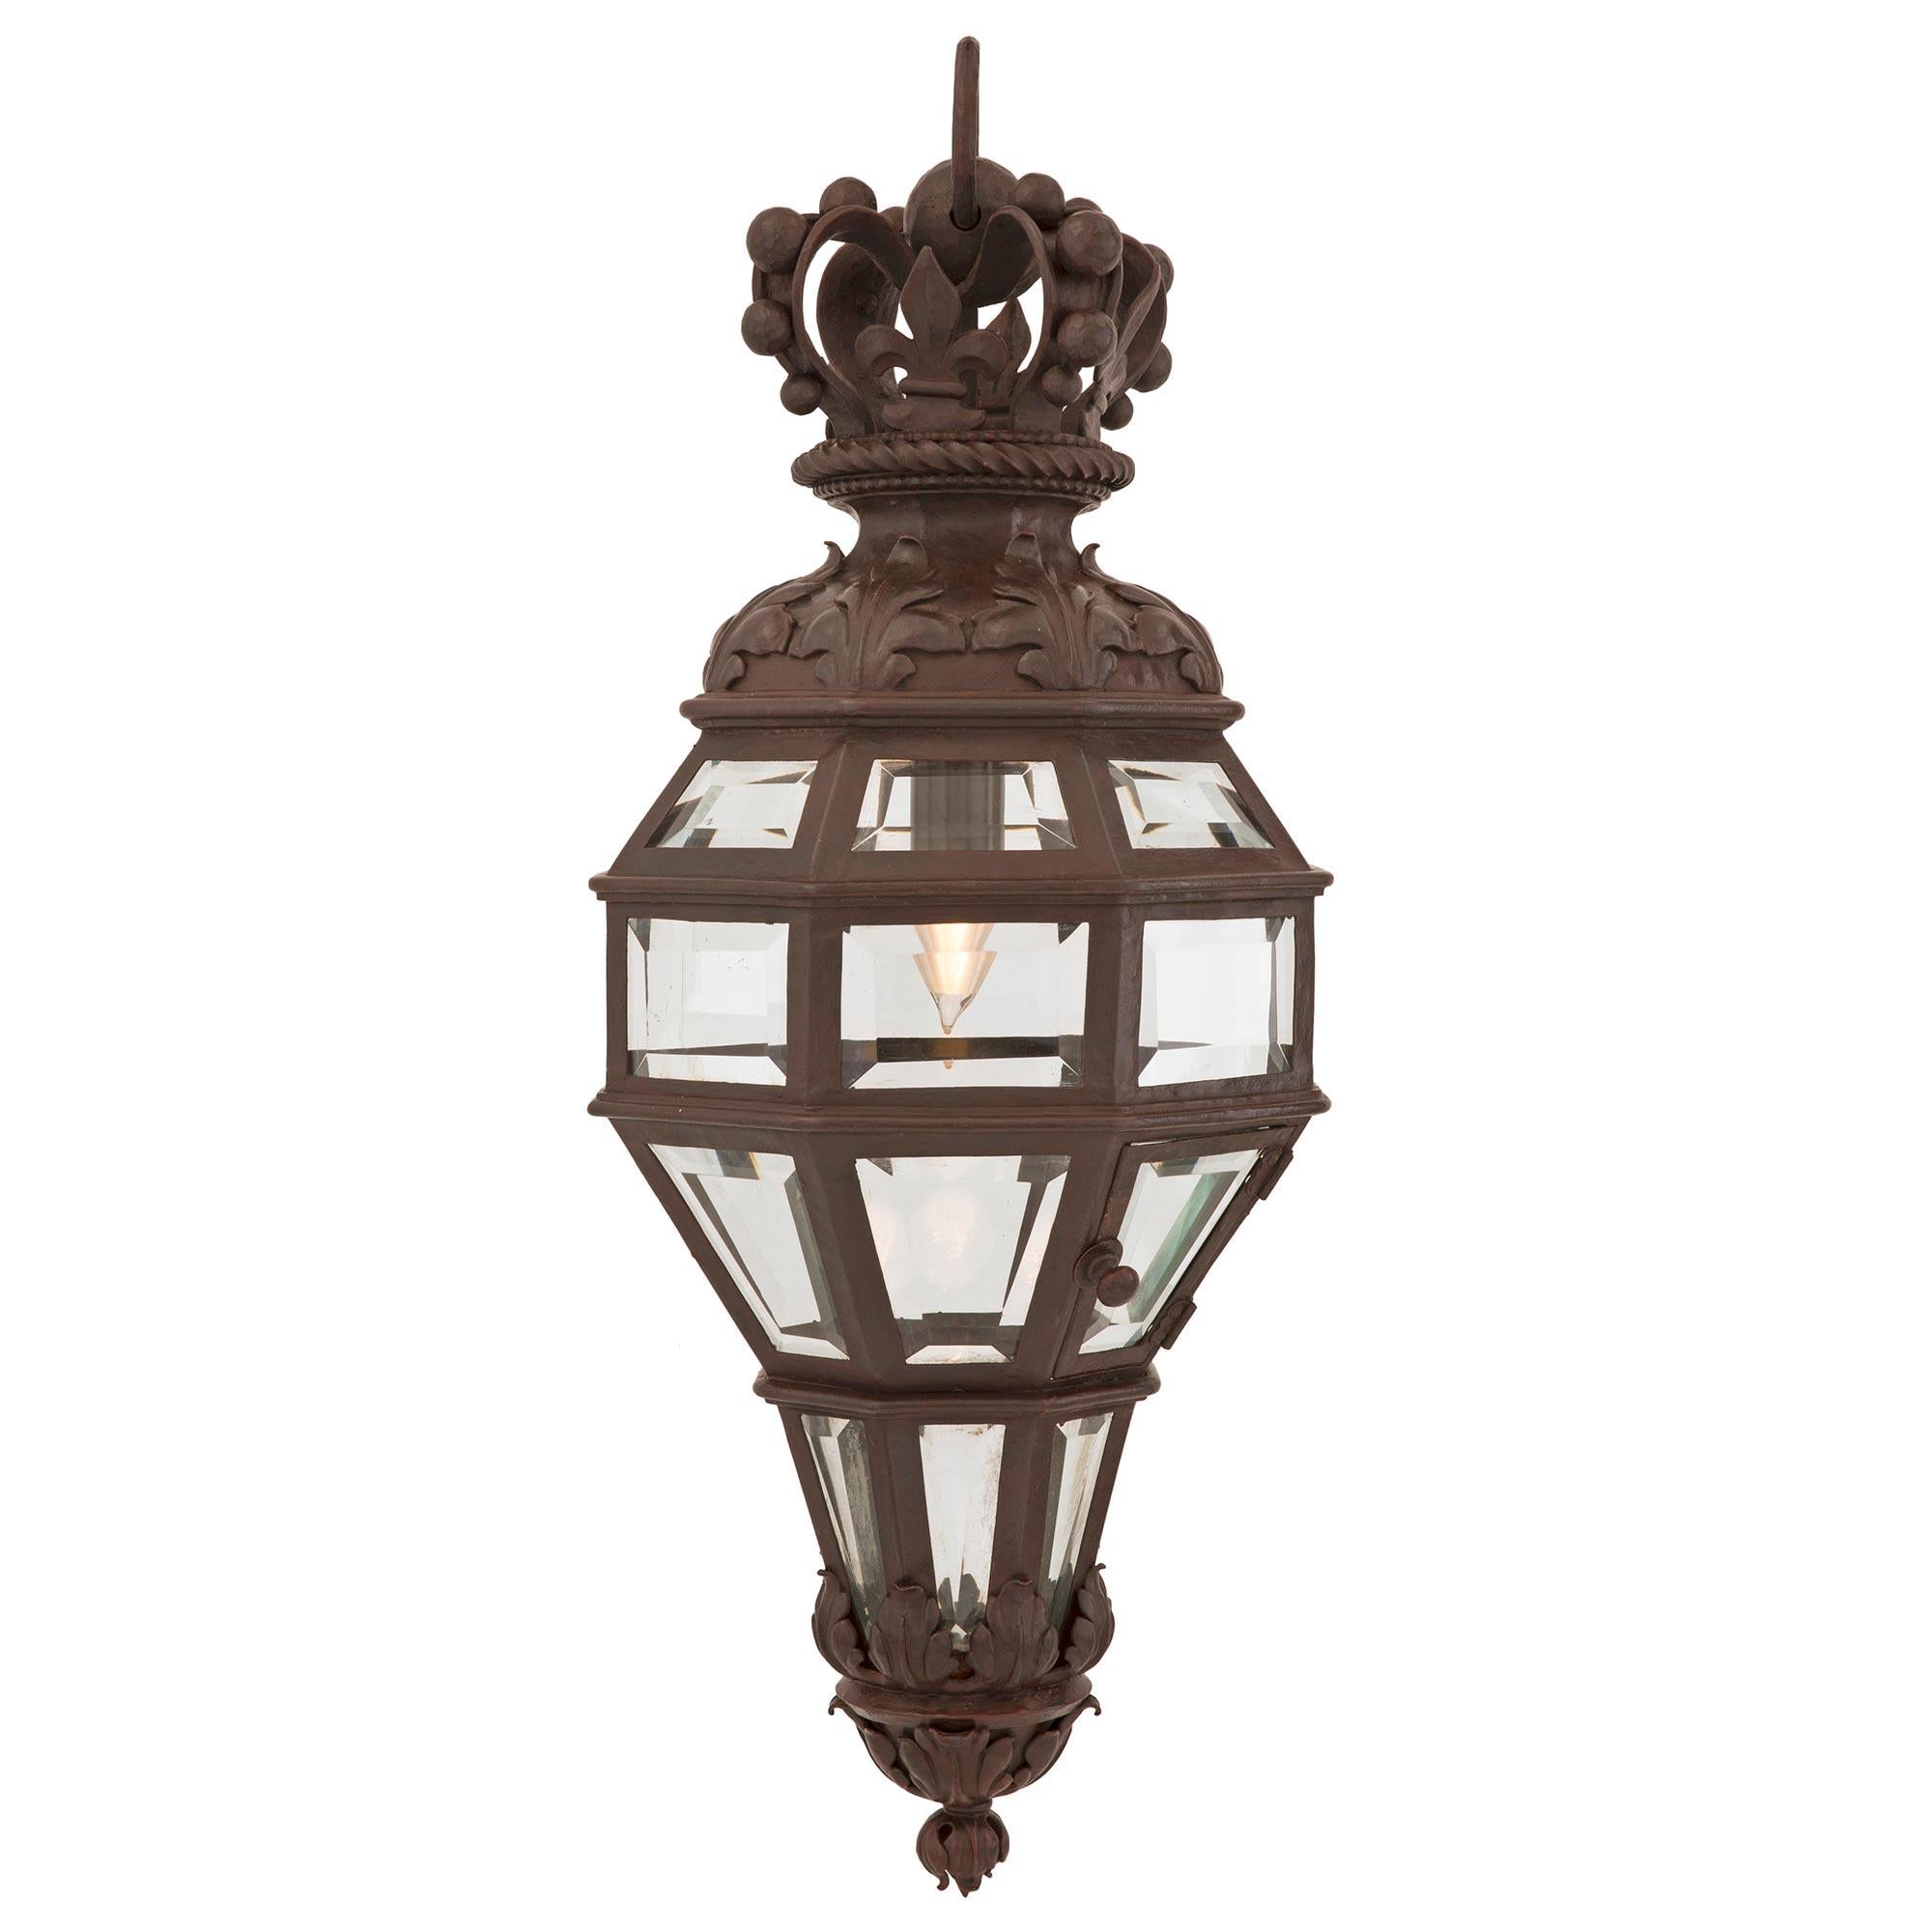 An exceptional and high quality French 19th century Louis XVI st. patinated bronze and crystal lantern. The lantern is modeled off an antechamber lantern still situated in the Palais de Versailles which was featured in Henry Havard's 19th century